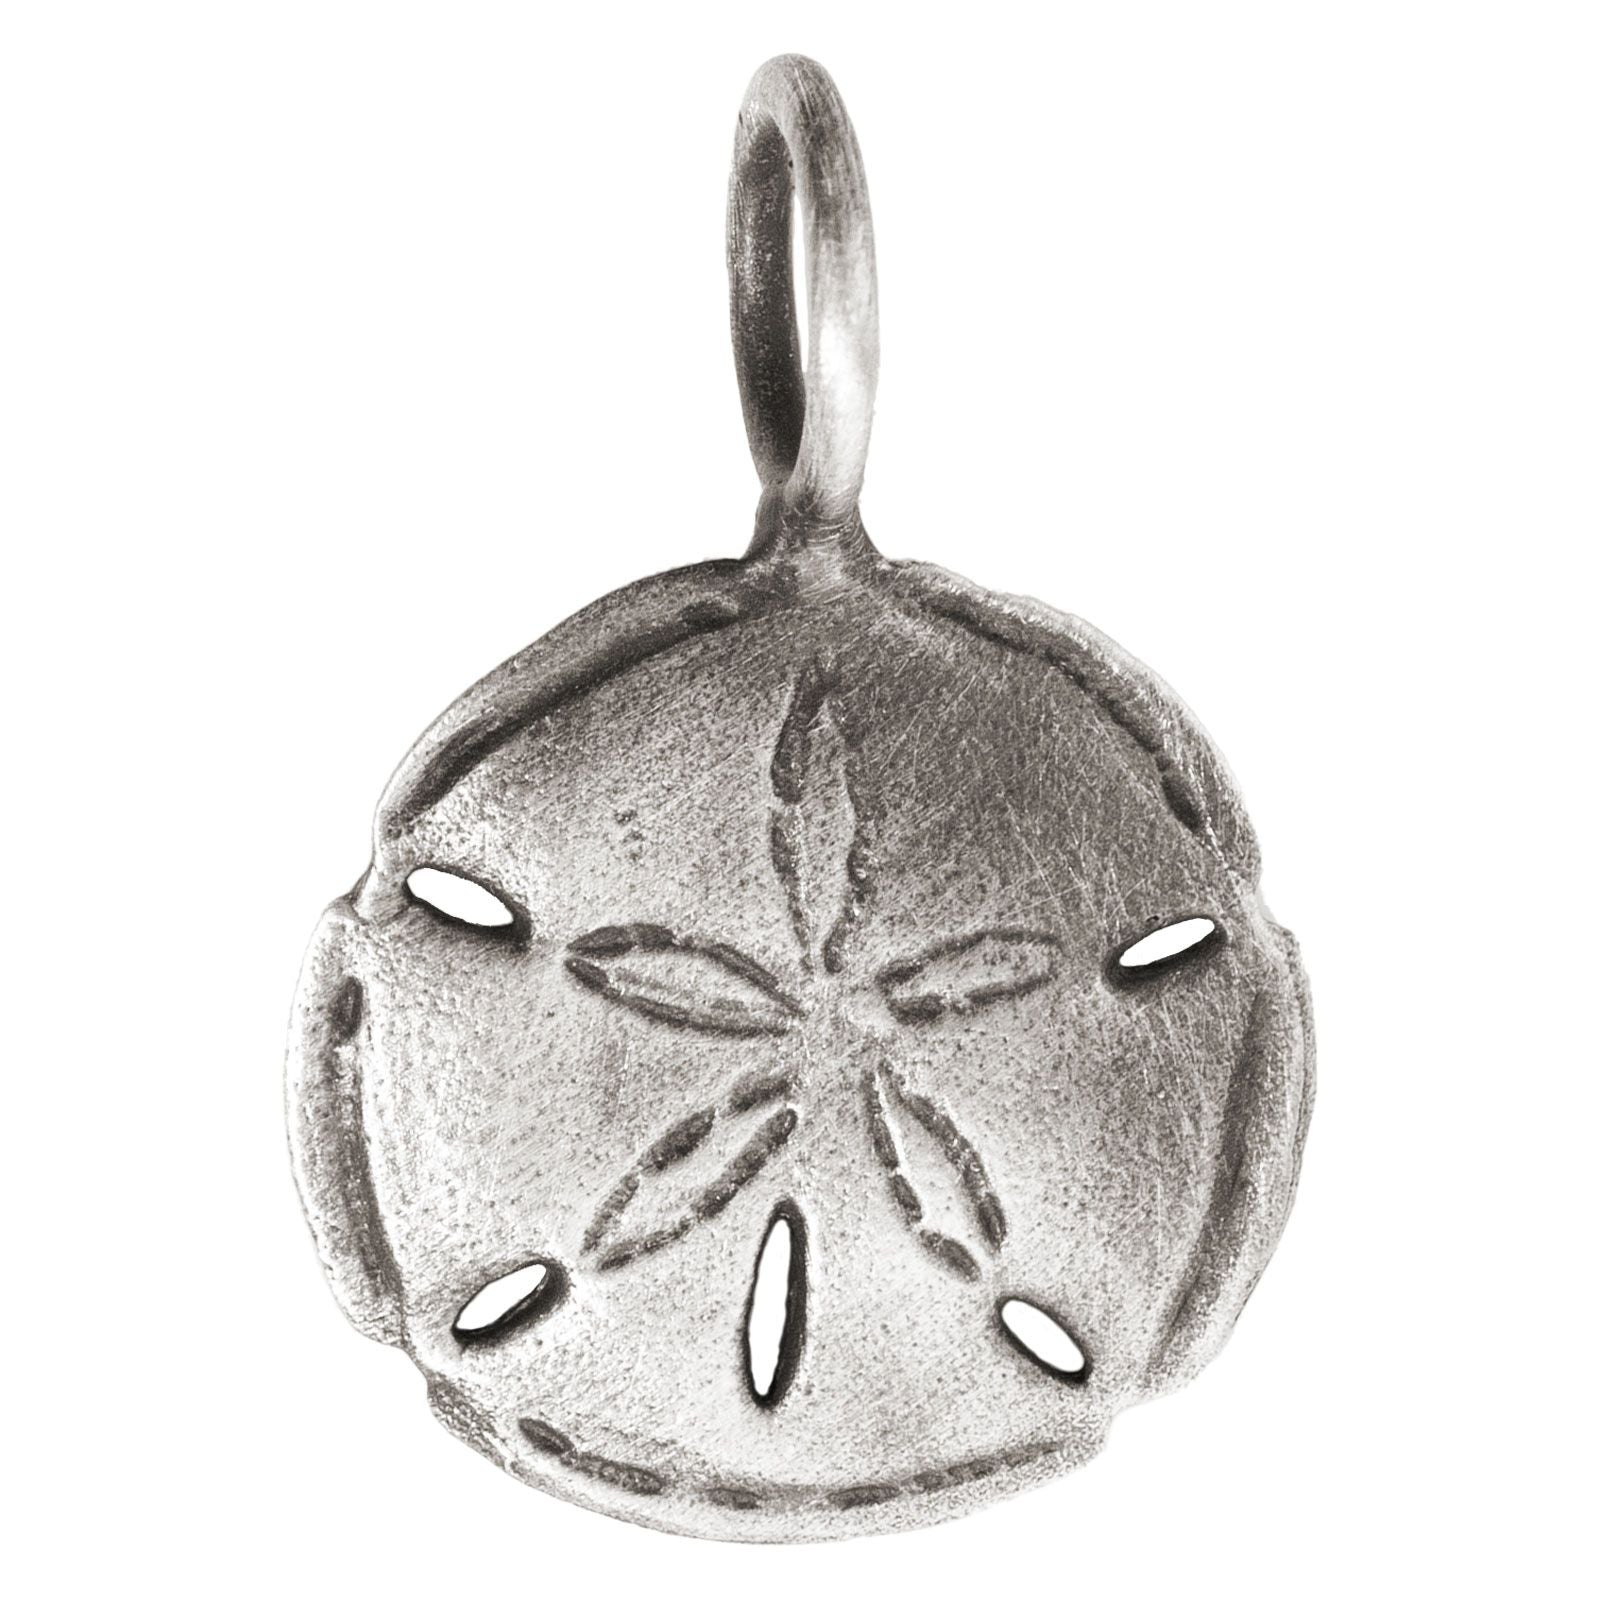 HEATHER B. MOORE STERLING SILVER SAND DOLLAR SCULPTURAL CHARM WITH PATINA FINISH